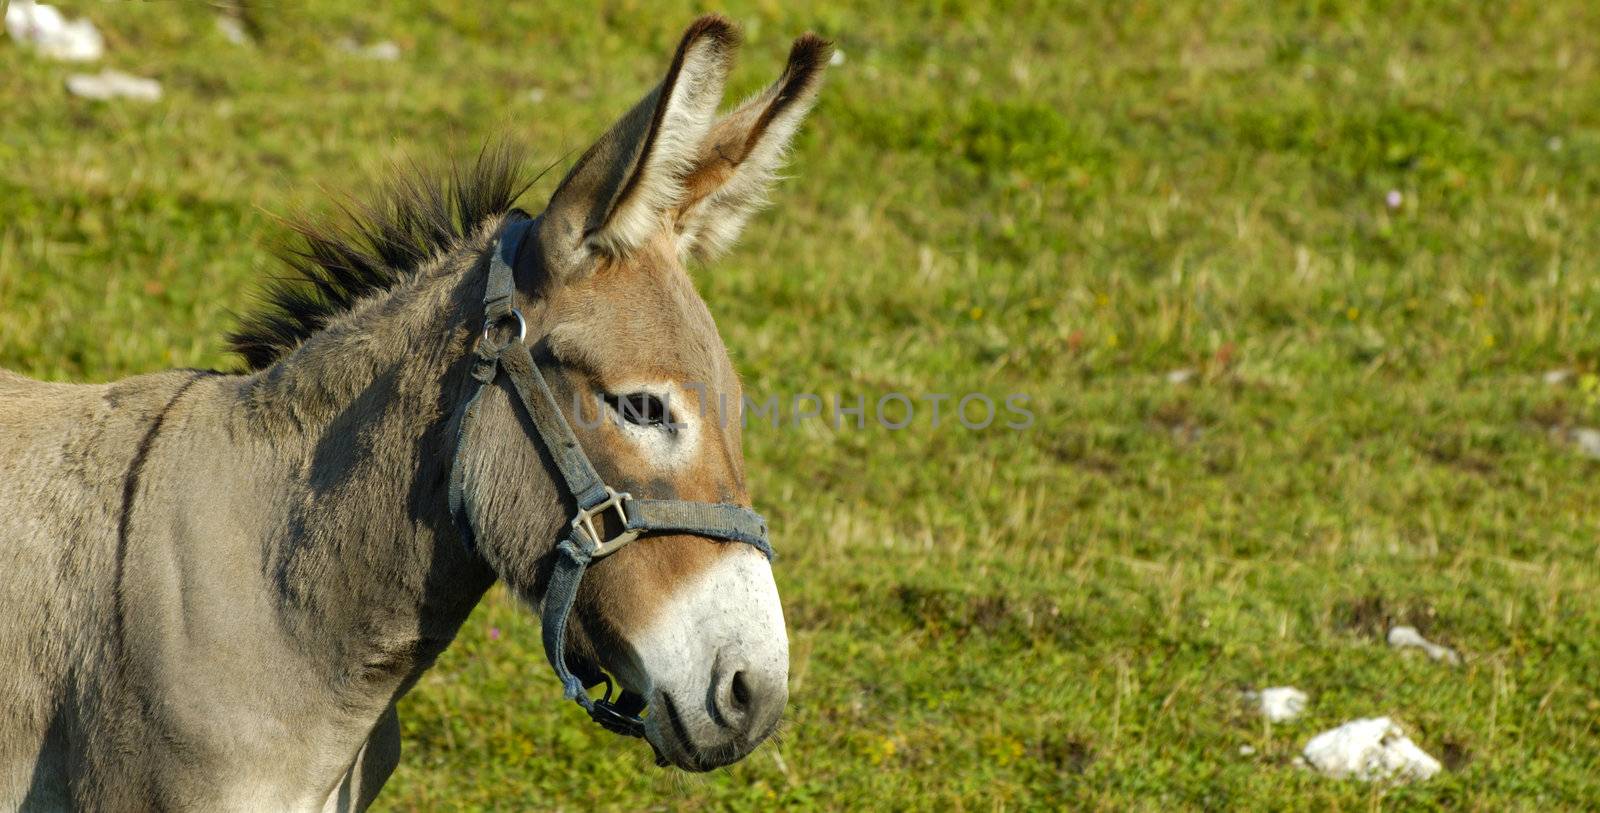 A patient little donkey in a field. Space for text on the grass background.